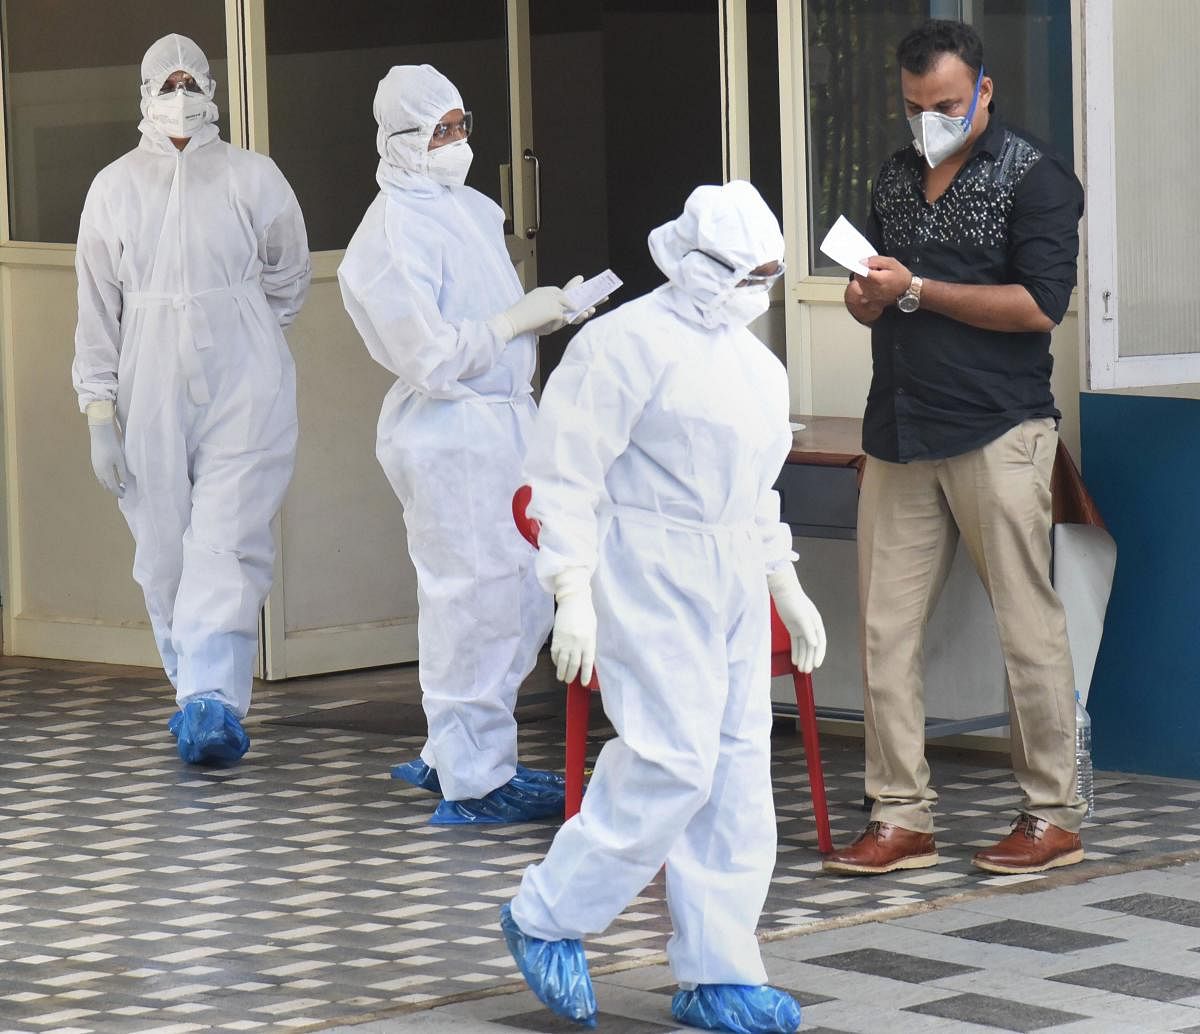  Medical staff members wear masks and protective suits to mitigate the spread of coronavirus, outside the special isolation ward of District Hospital Aluva in Kochi. PTI